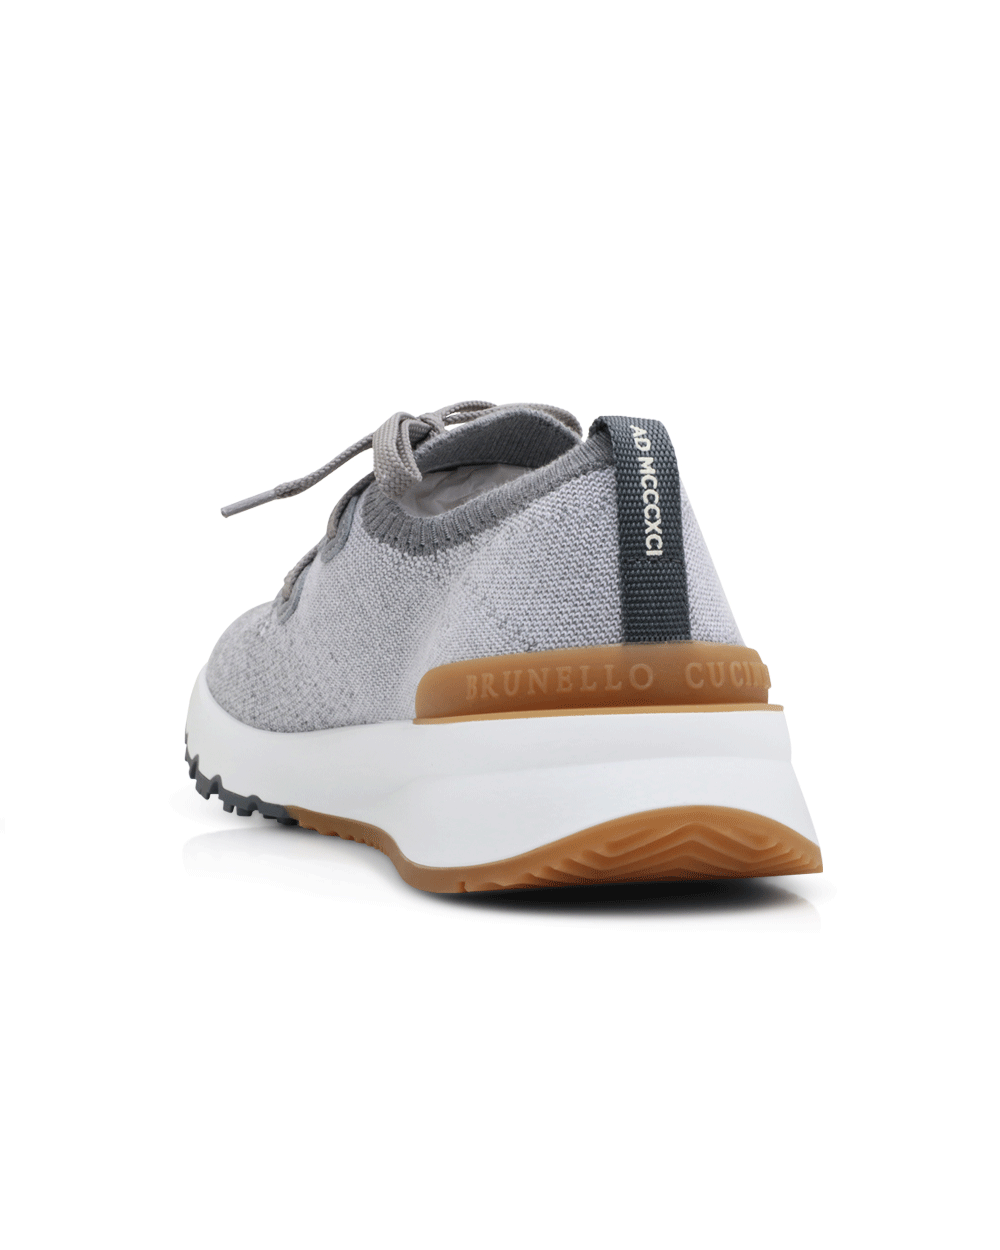 Knit Sneaker in Grey and White